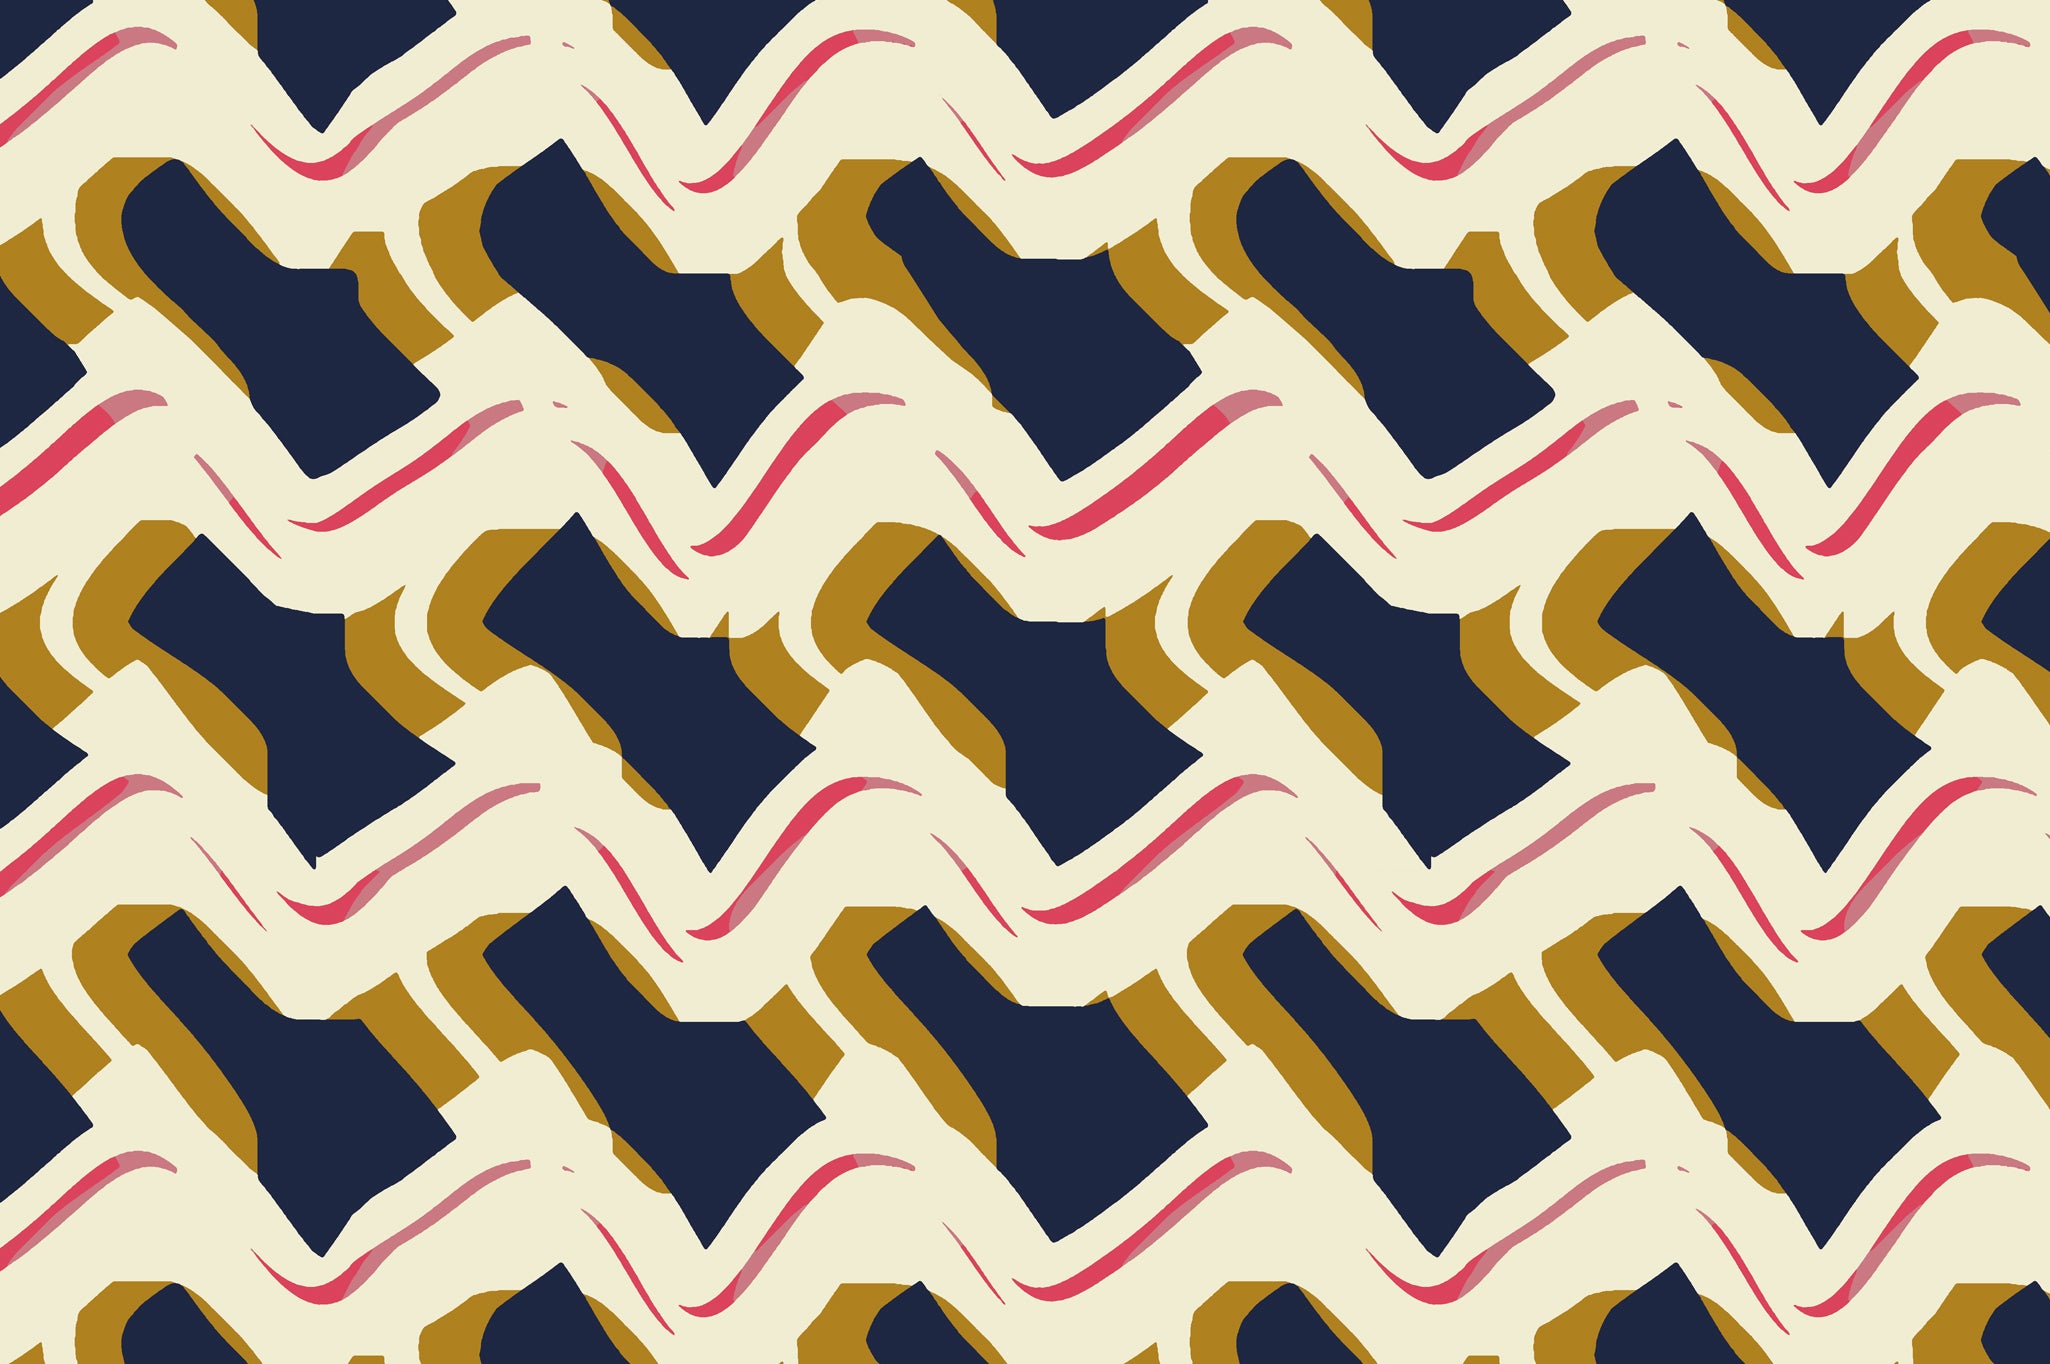 Detail of wallpaper in an abstract shape print in shades of mustard, gray, pink and cream.